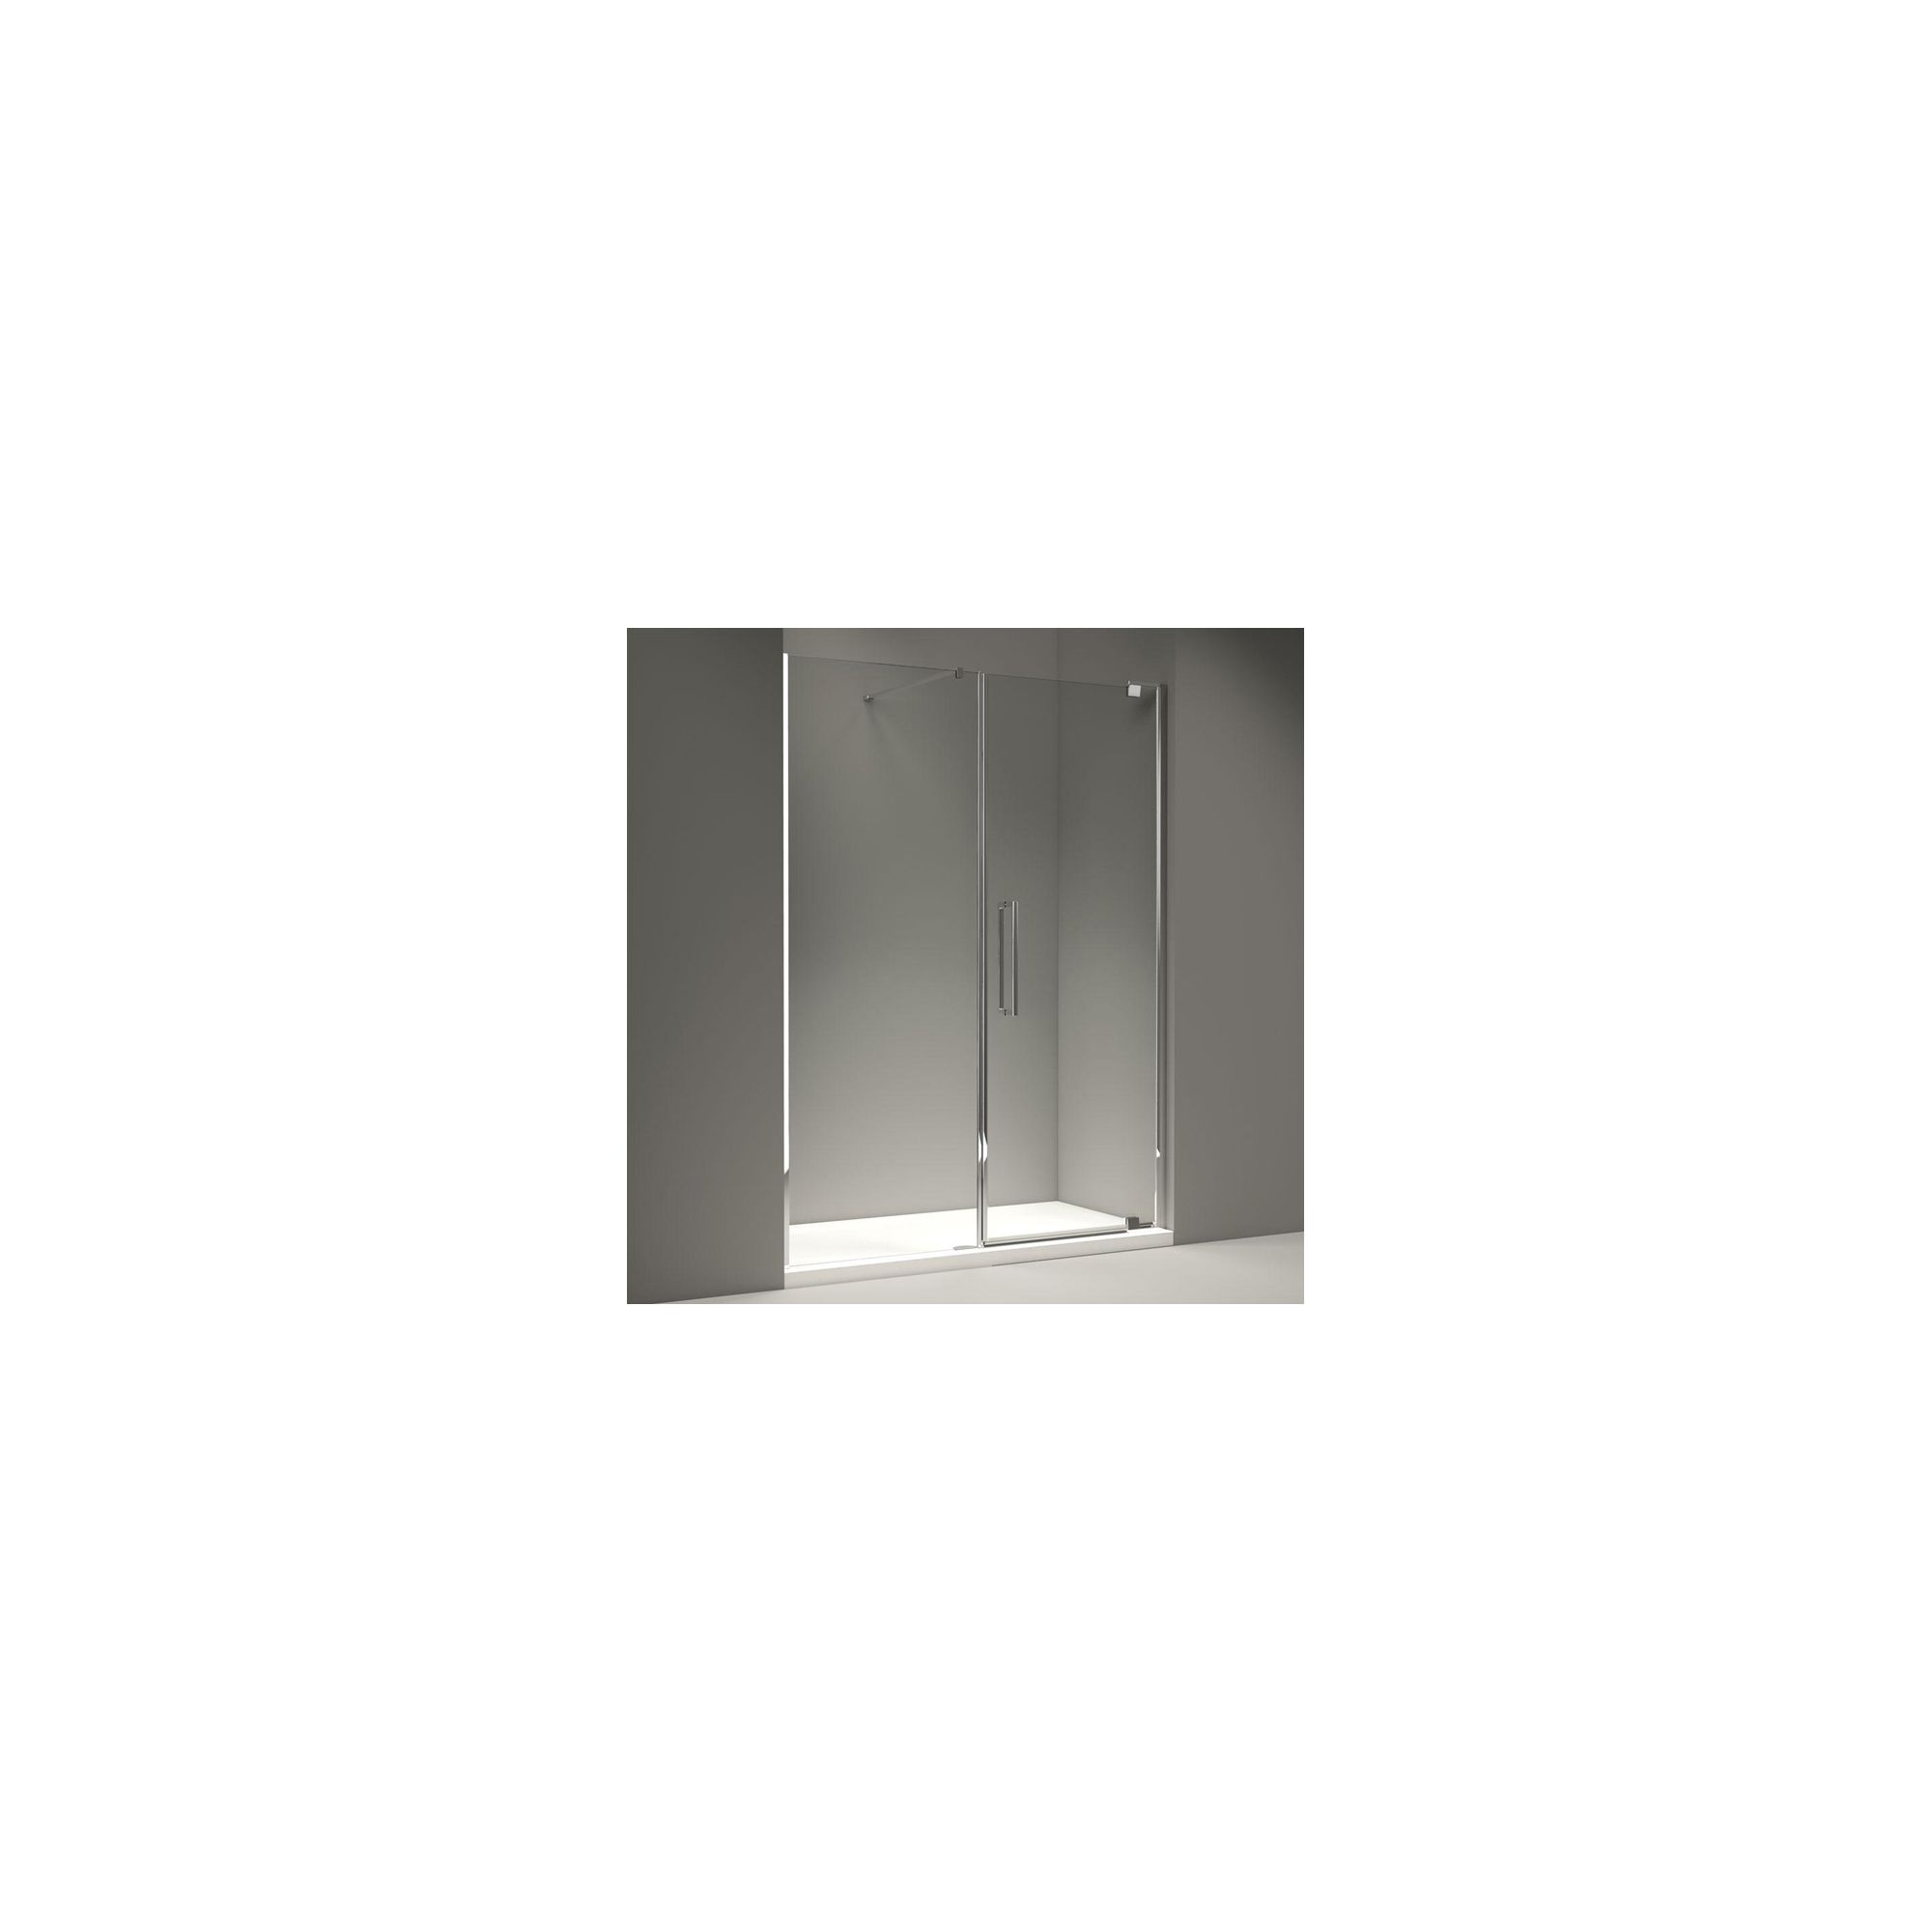 Merlyn Series 10 Inline Pivot Shower Door, 1600mm Wide, 10mm Smoked Glass at Tesco Direct